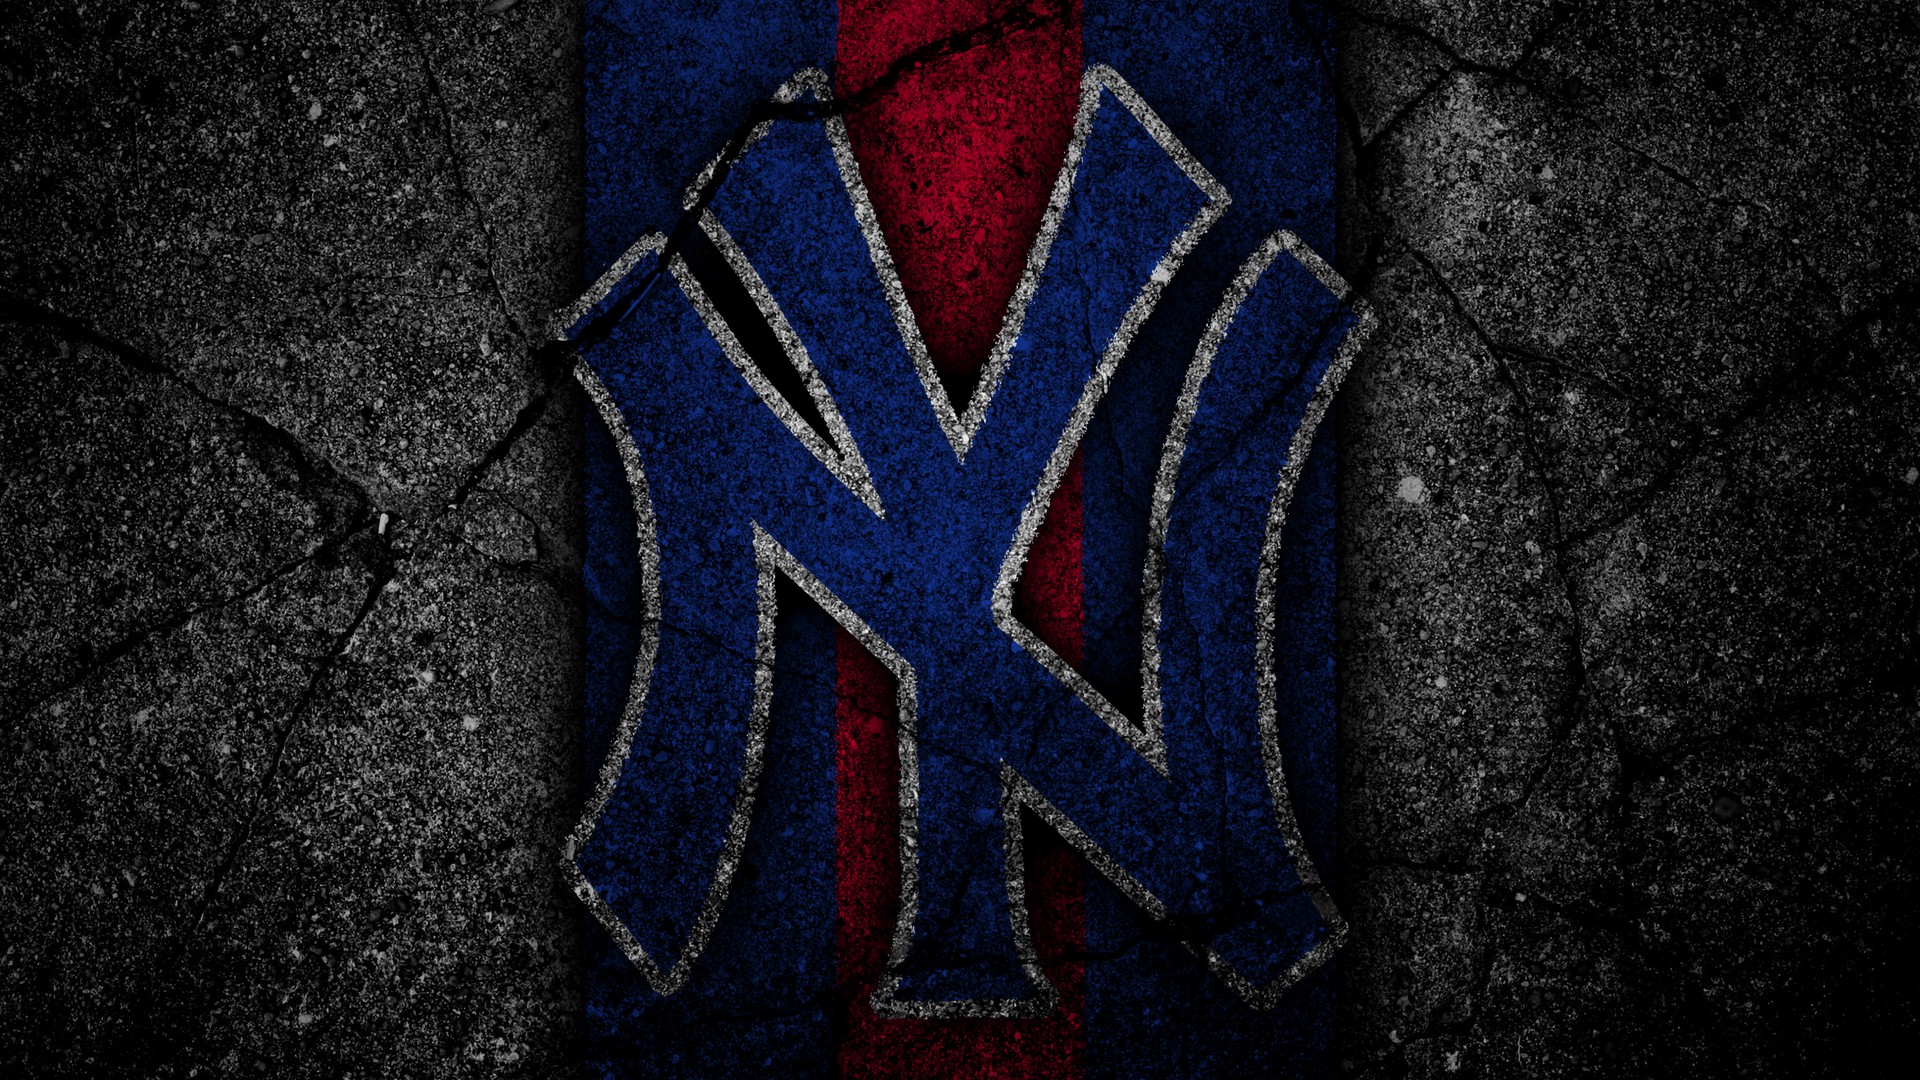 New York Yankees MLB Wallpaper With high-resolution 1920X1080 pixel. You can use this wallpaper for Mac Desktop Wallpaper, Laptop Screensavers, Android Wallpapers, Tablet or iPhone Home Screen and another mobile phone device